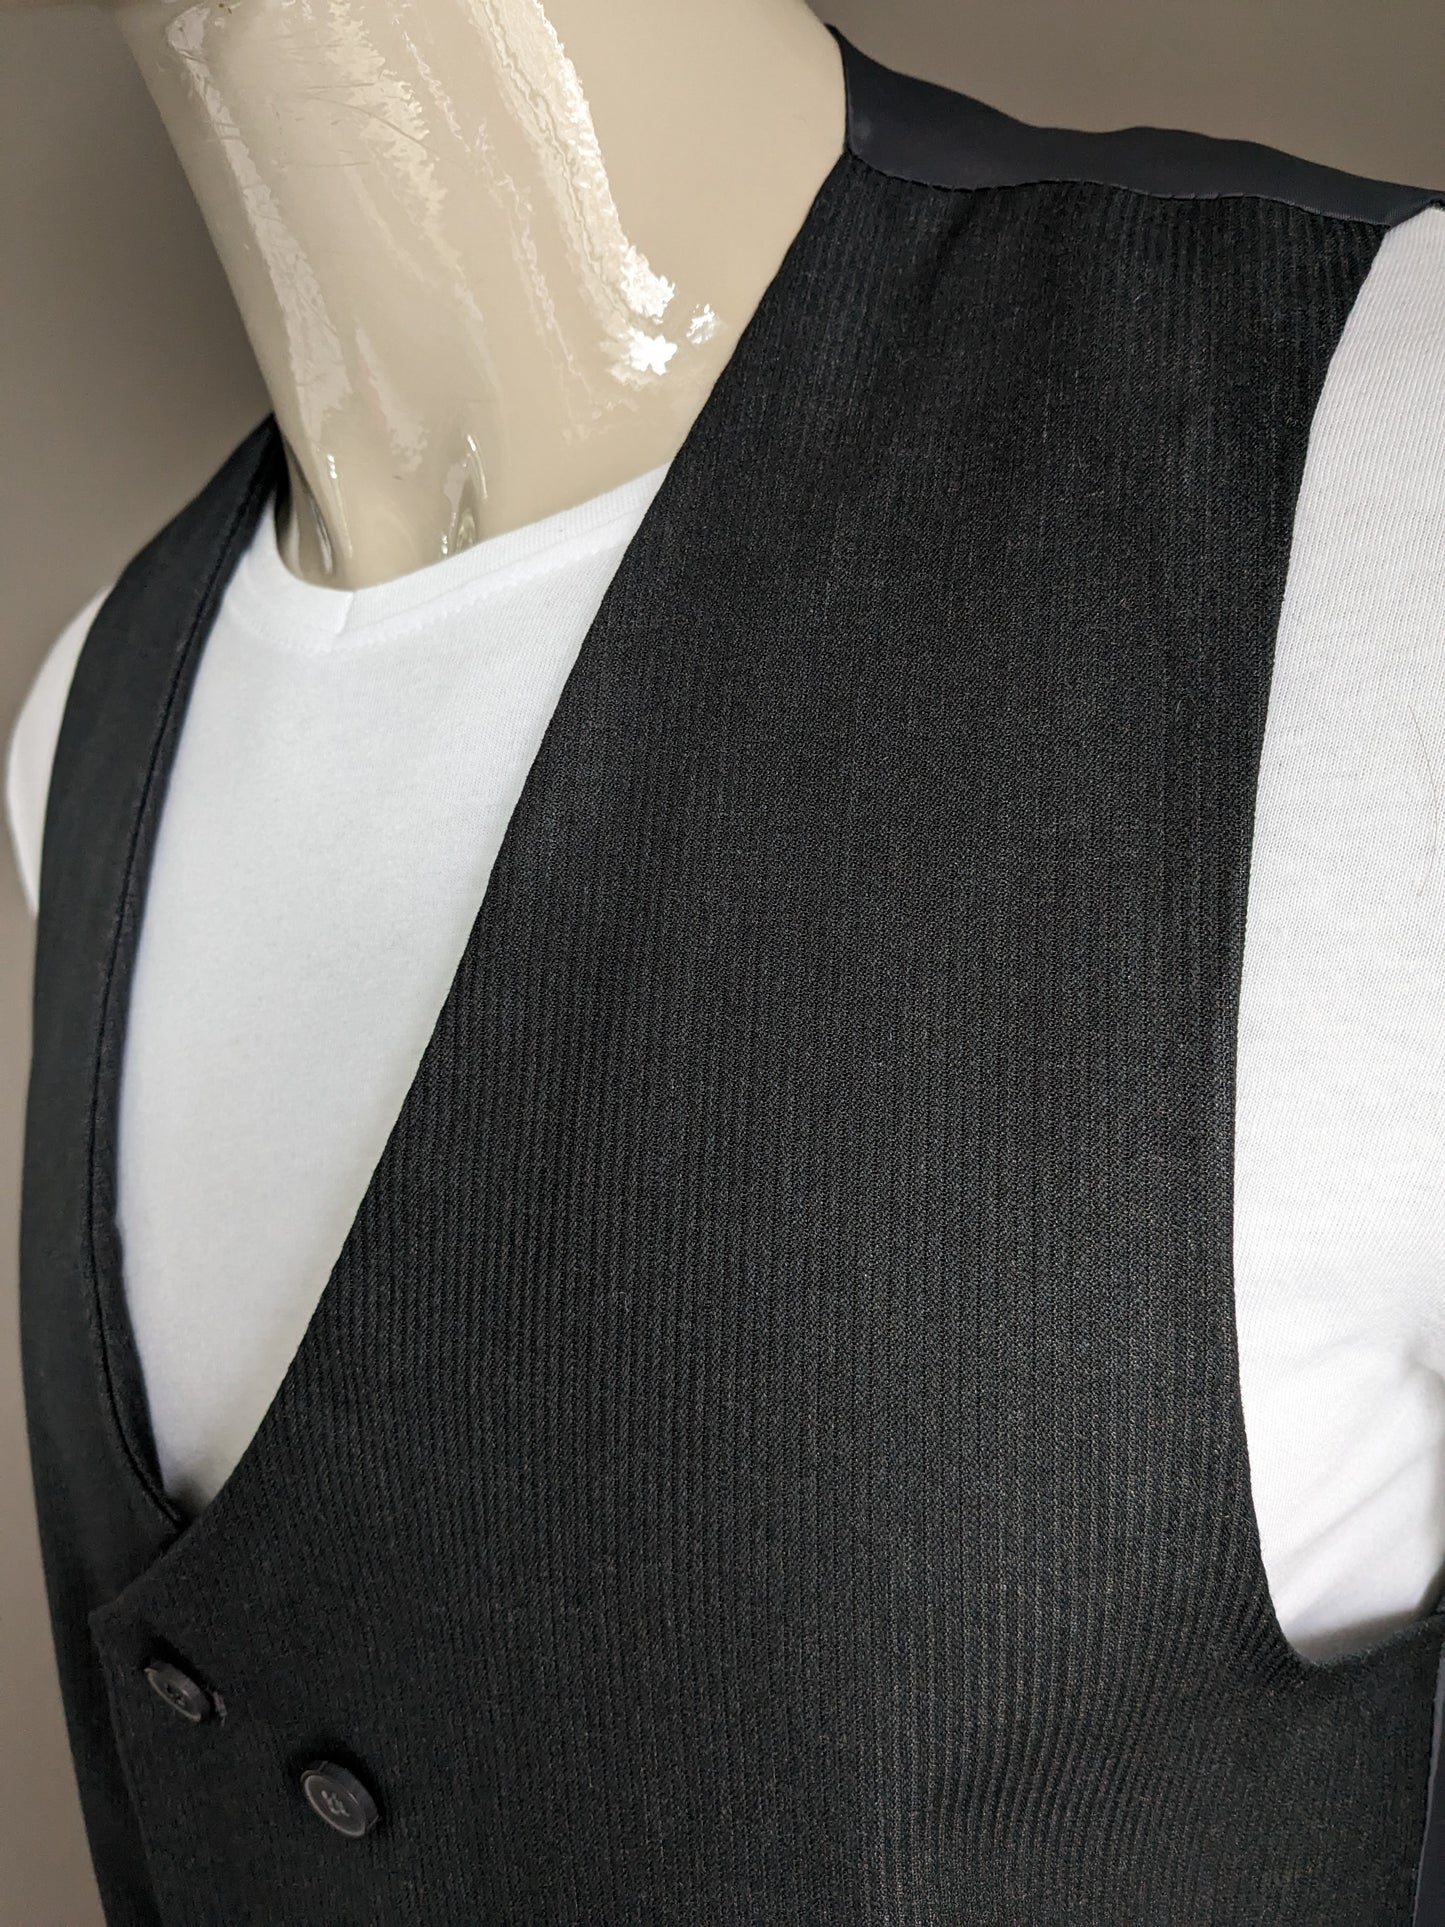 Double Breasted waistcoat. Gray striped. Size L.